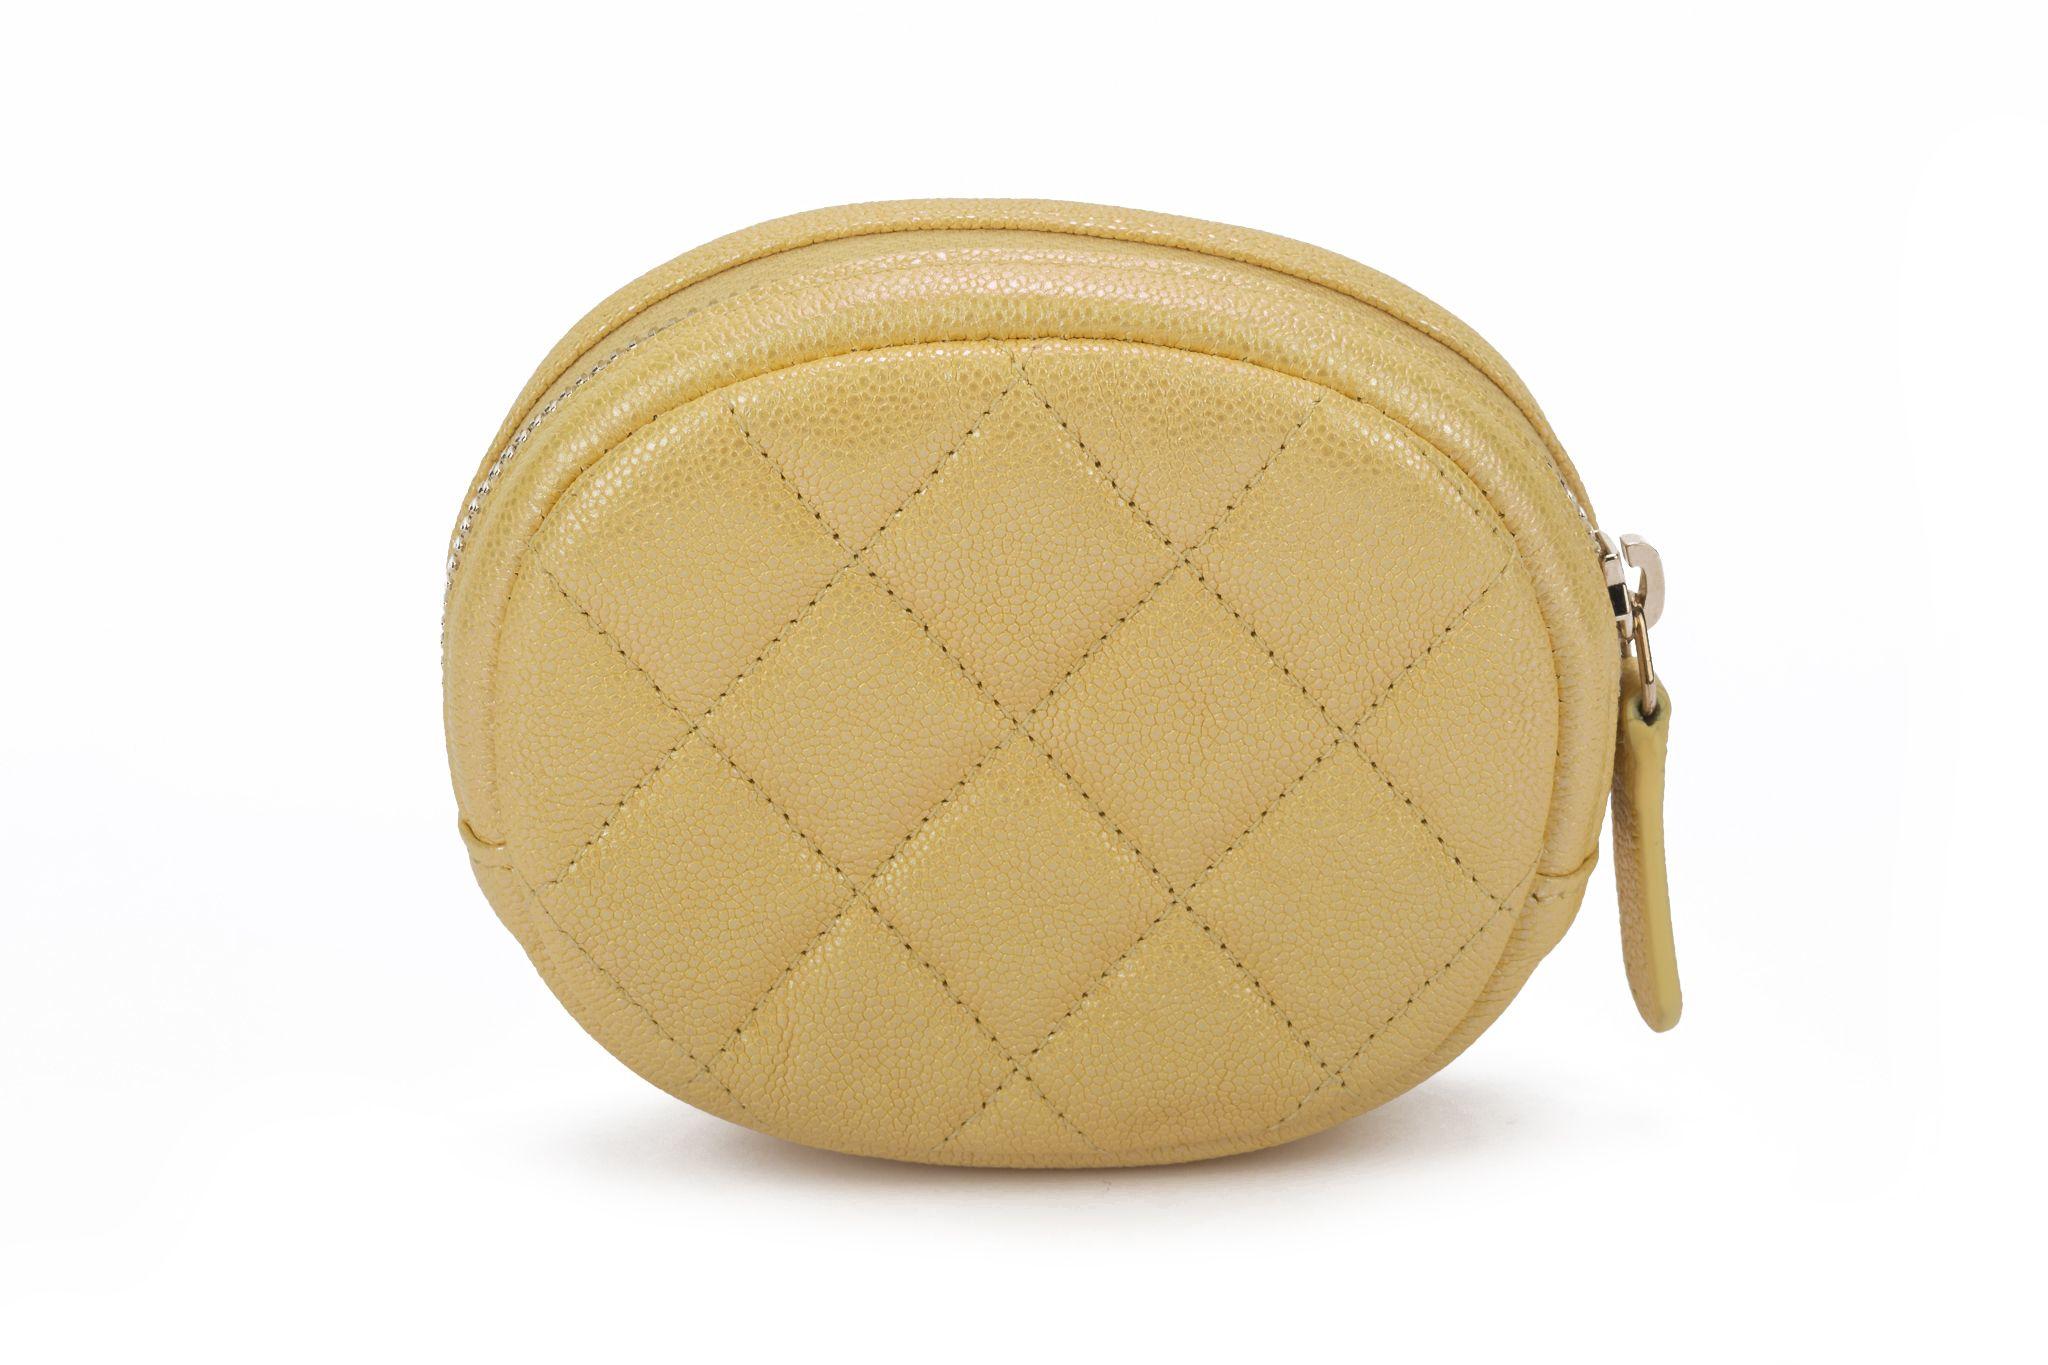 Chanel new in box oval iridescent yellow quilted caviar coin case with yellow gold logo. Collection 27. Comes with hologram, ID card, booklet, dust cover and box.